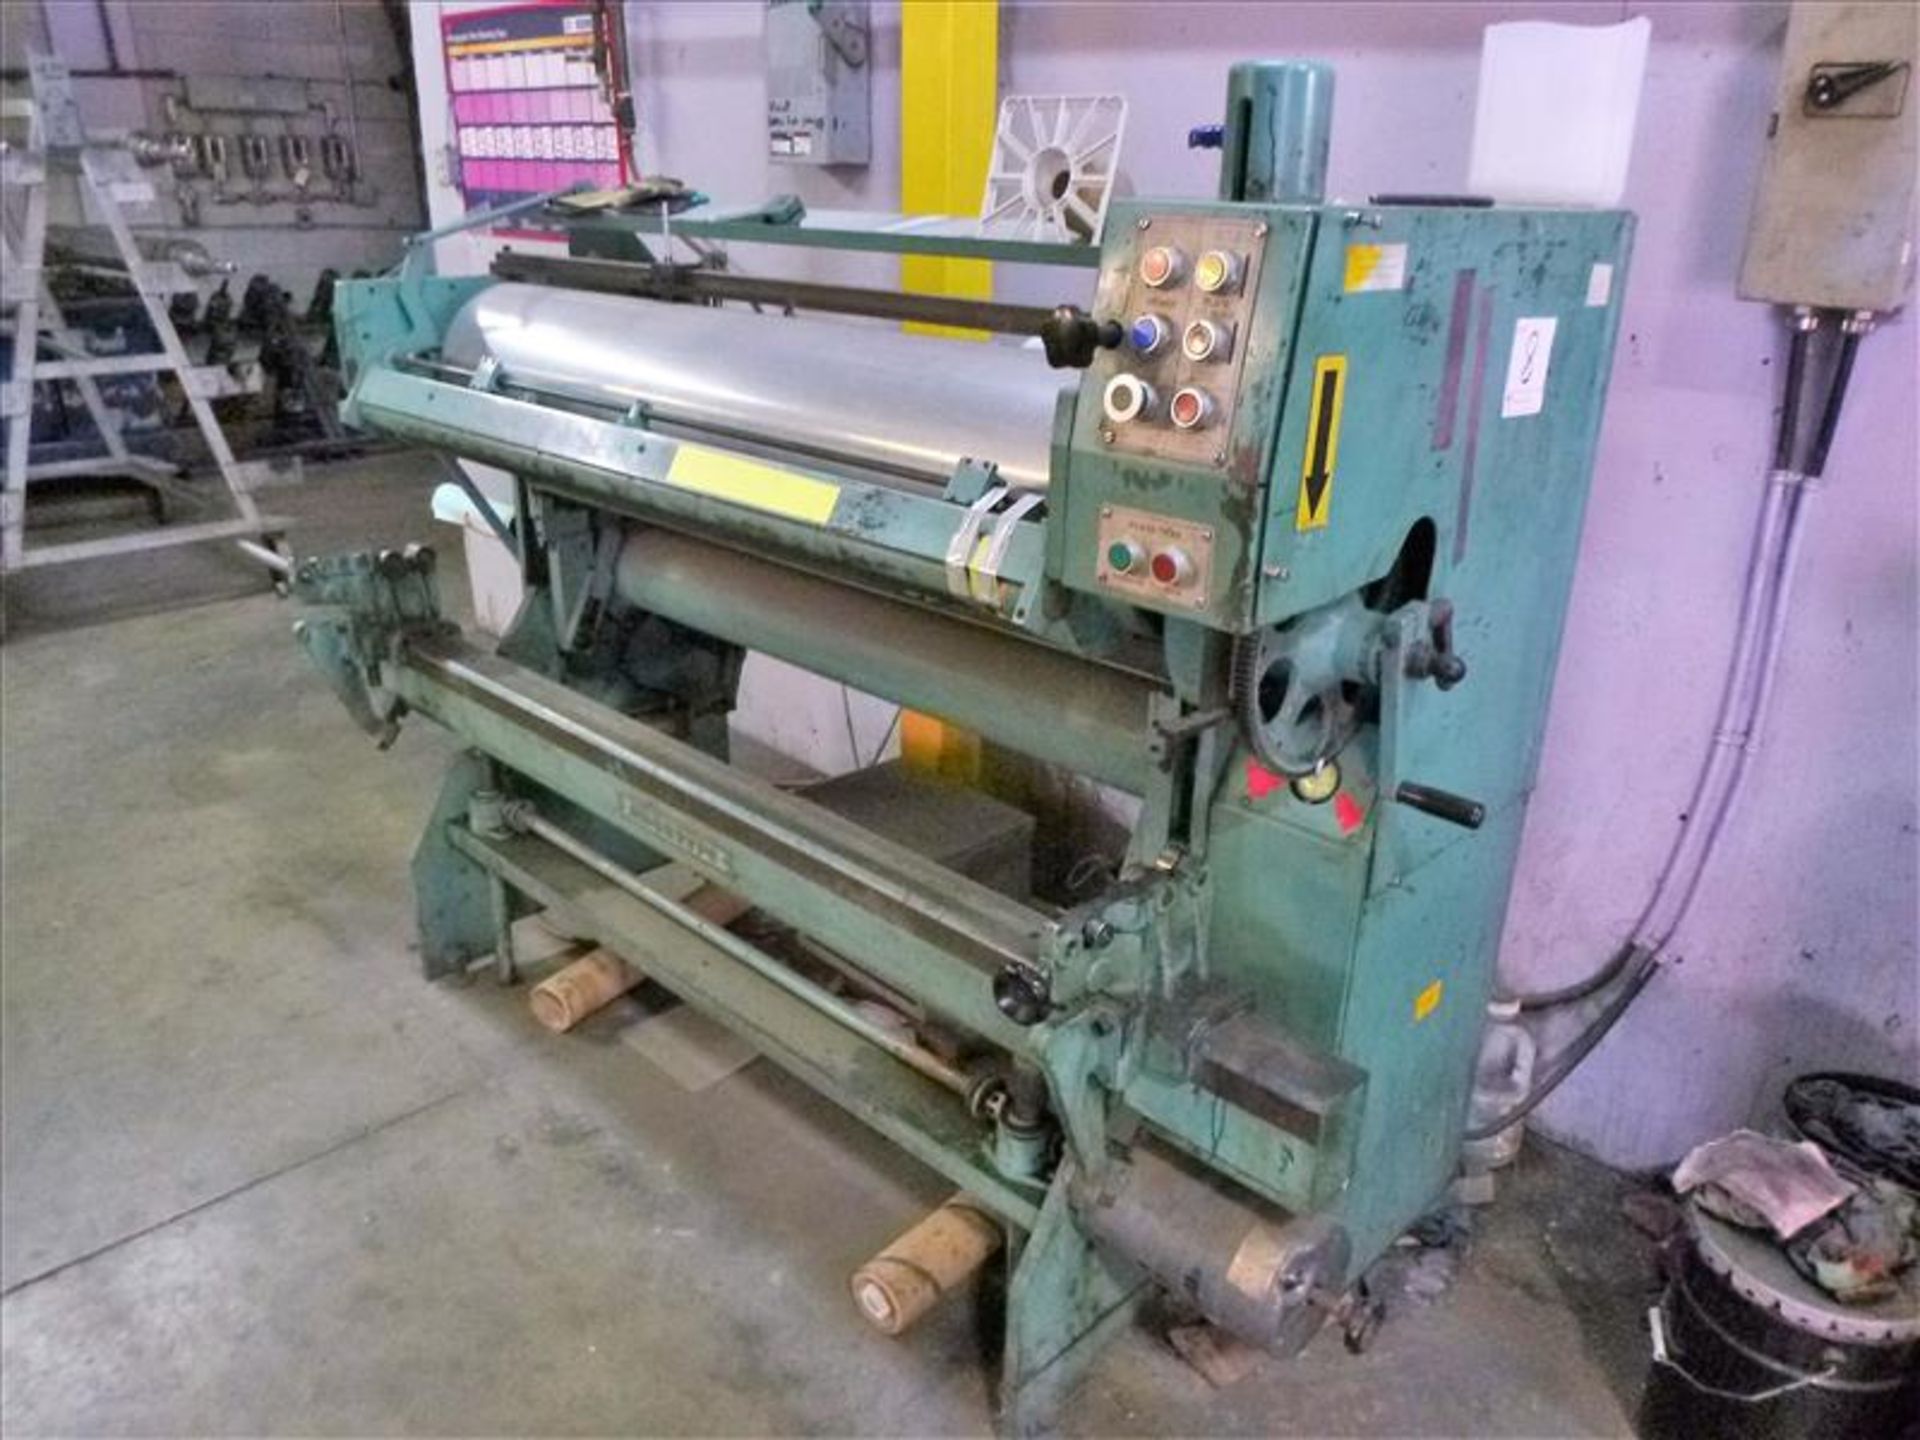 Moss type rubber plate mounter proofer, model 18-3, ser. no. 299 (Located in Mississauga, ON)